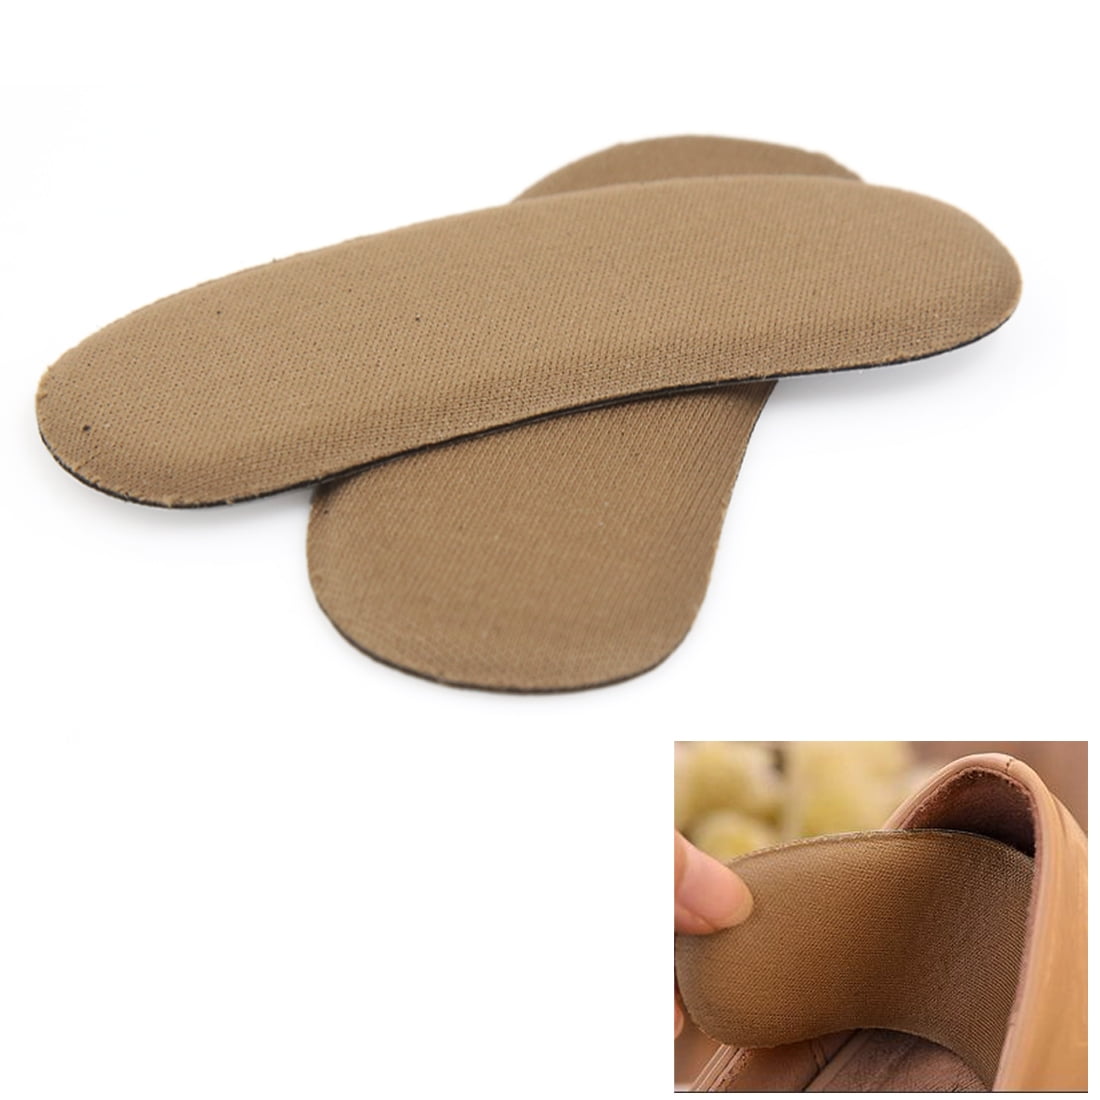 1 Pair Sticky Fabric Shoe Heel Inserts Insoles Pads Cushion Grip Protector P KW 